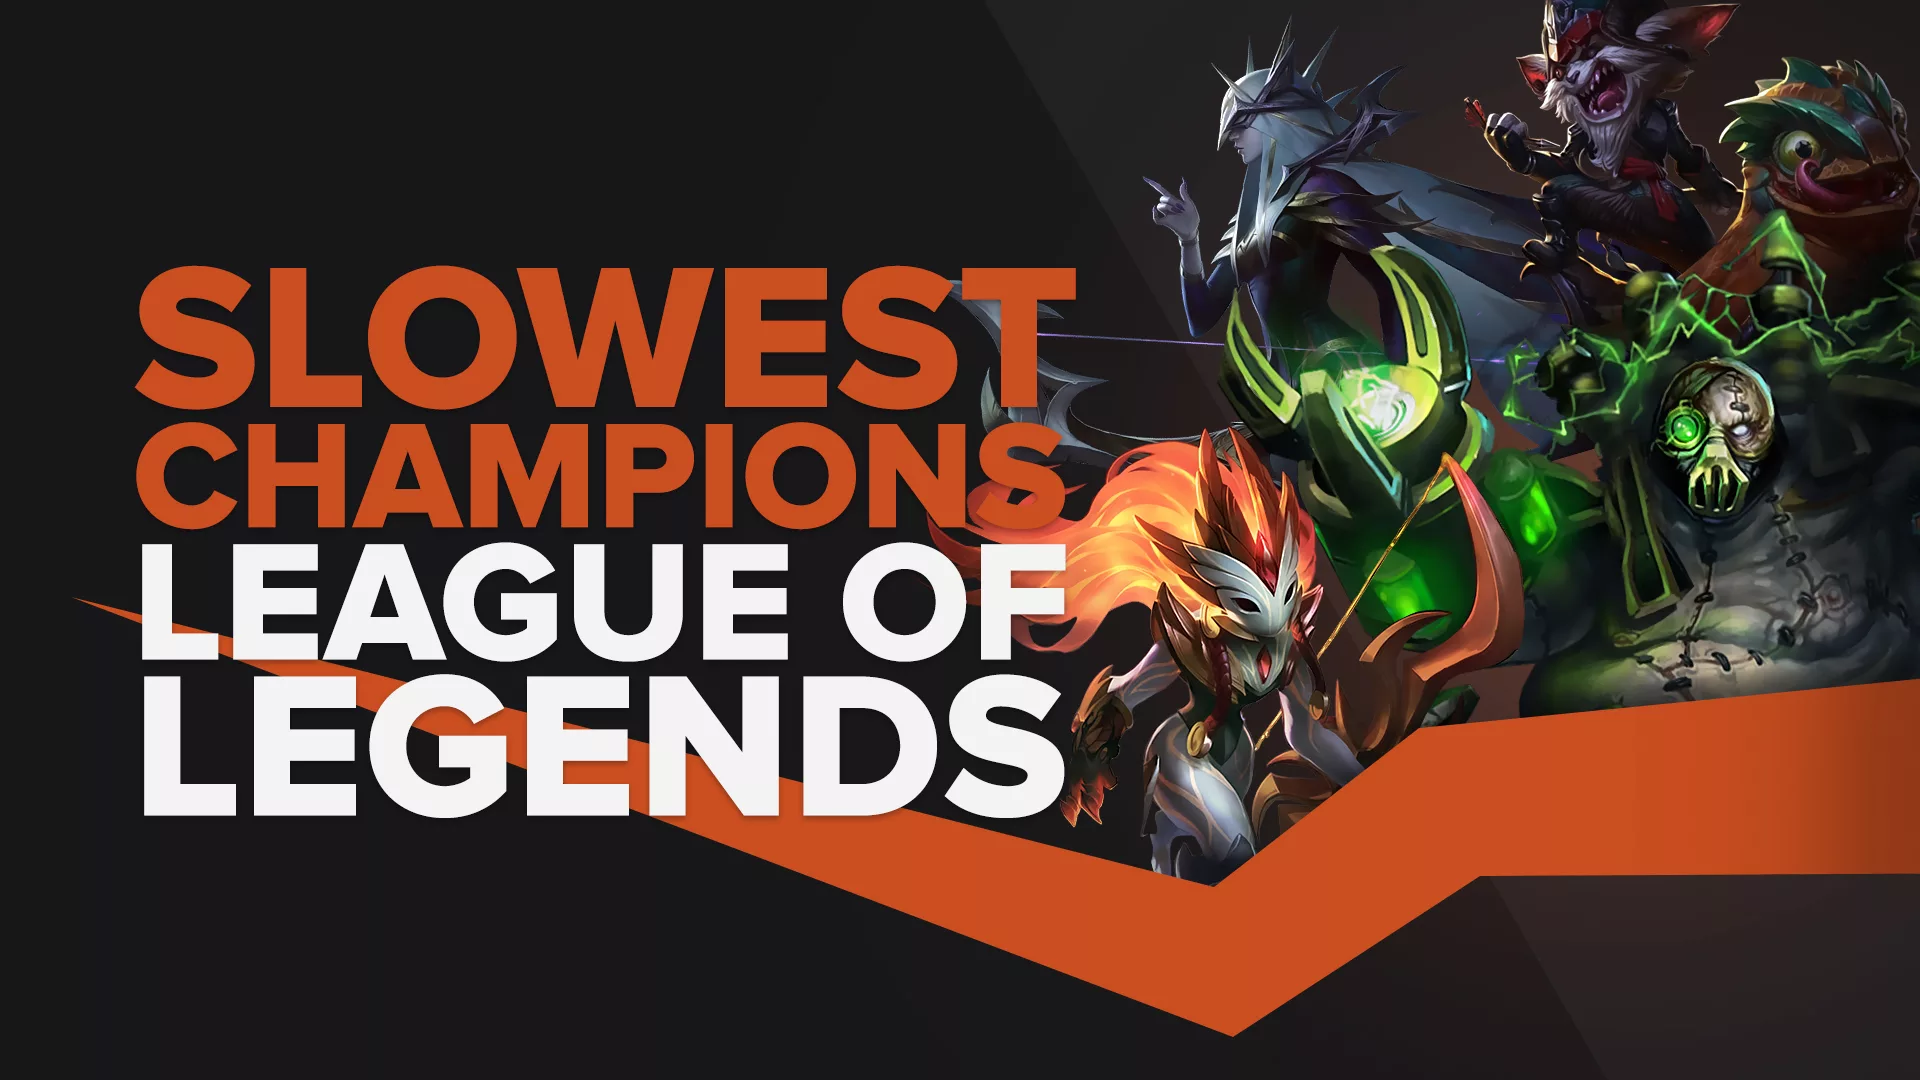 The slowest champions in league of legends